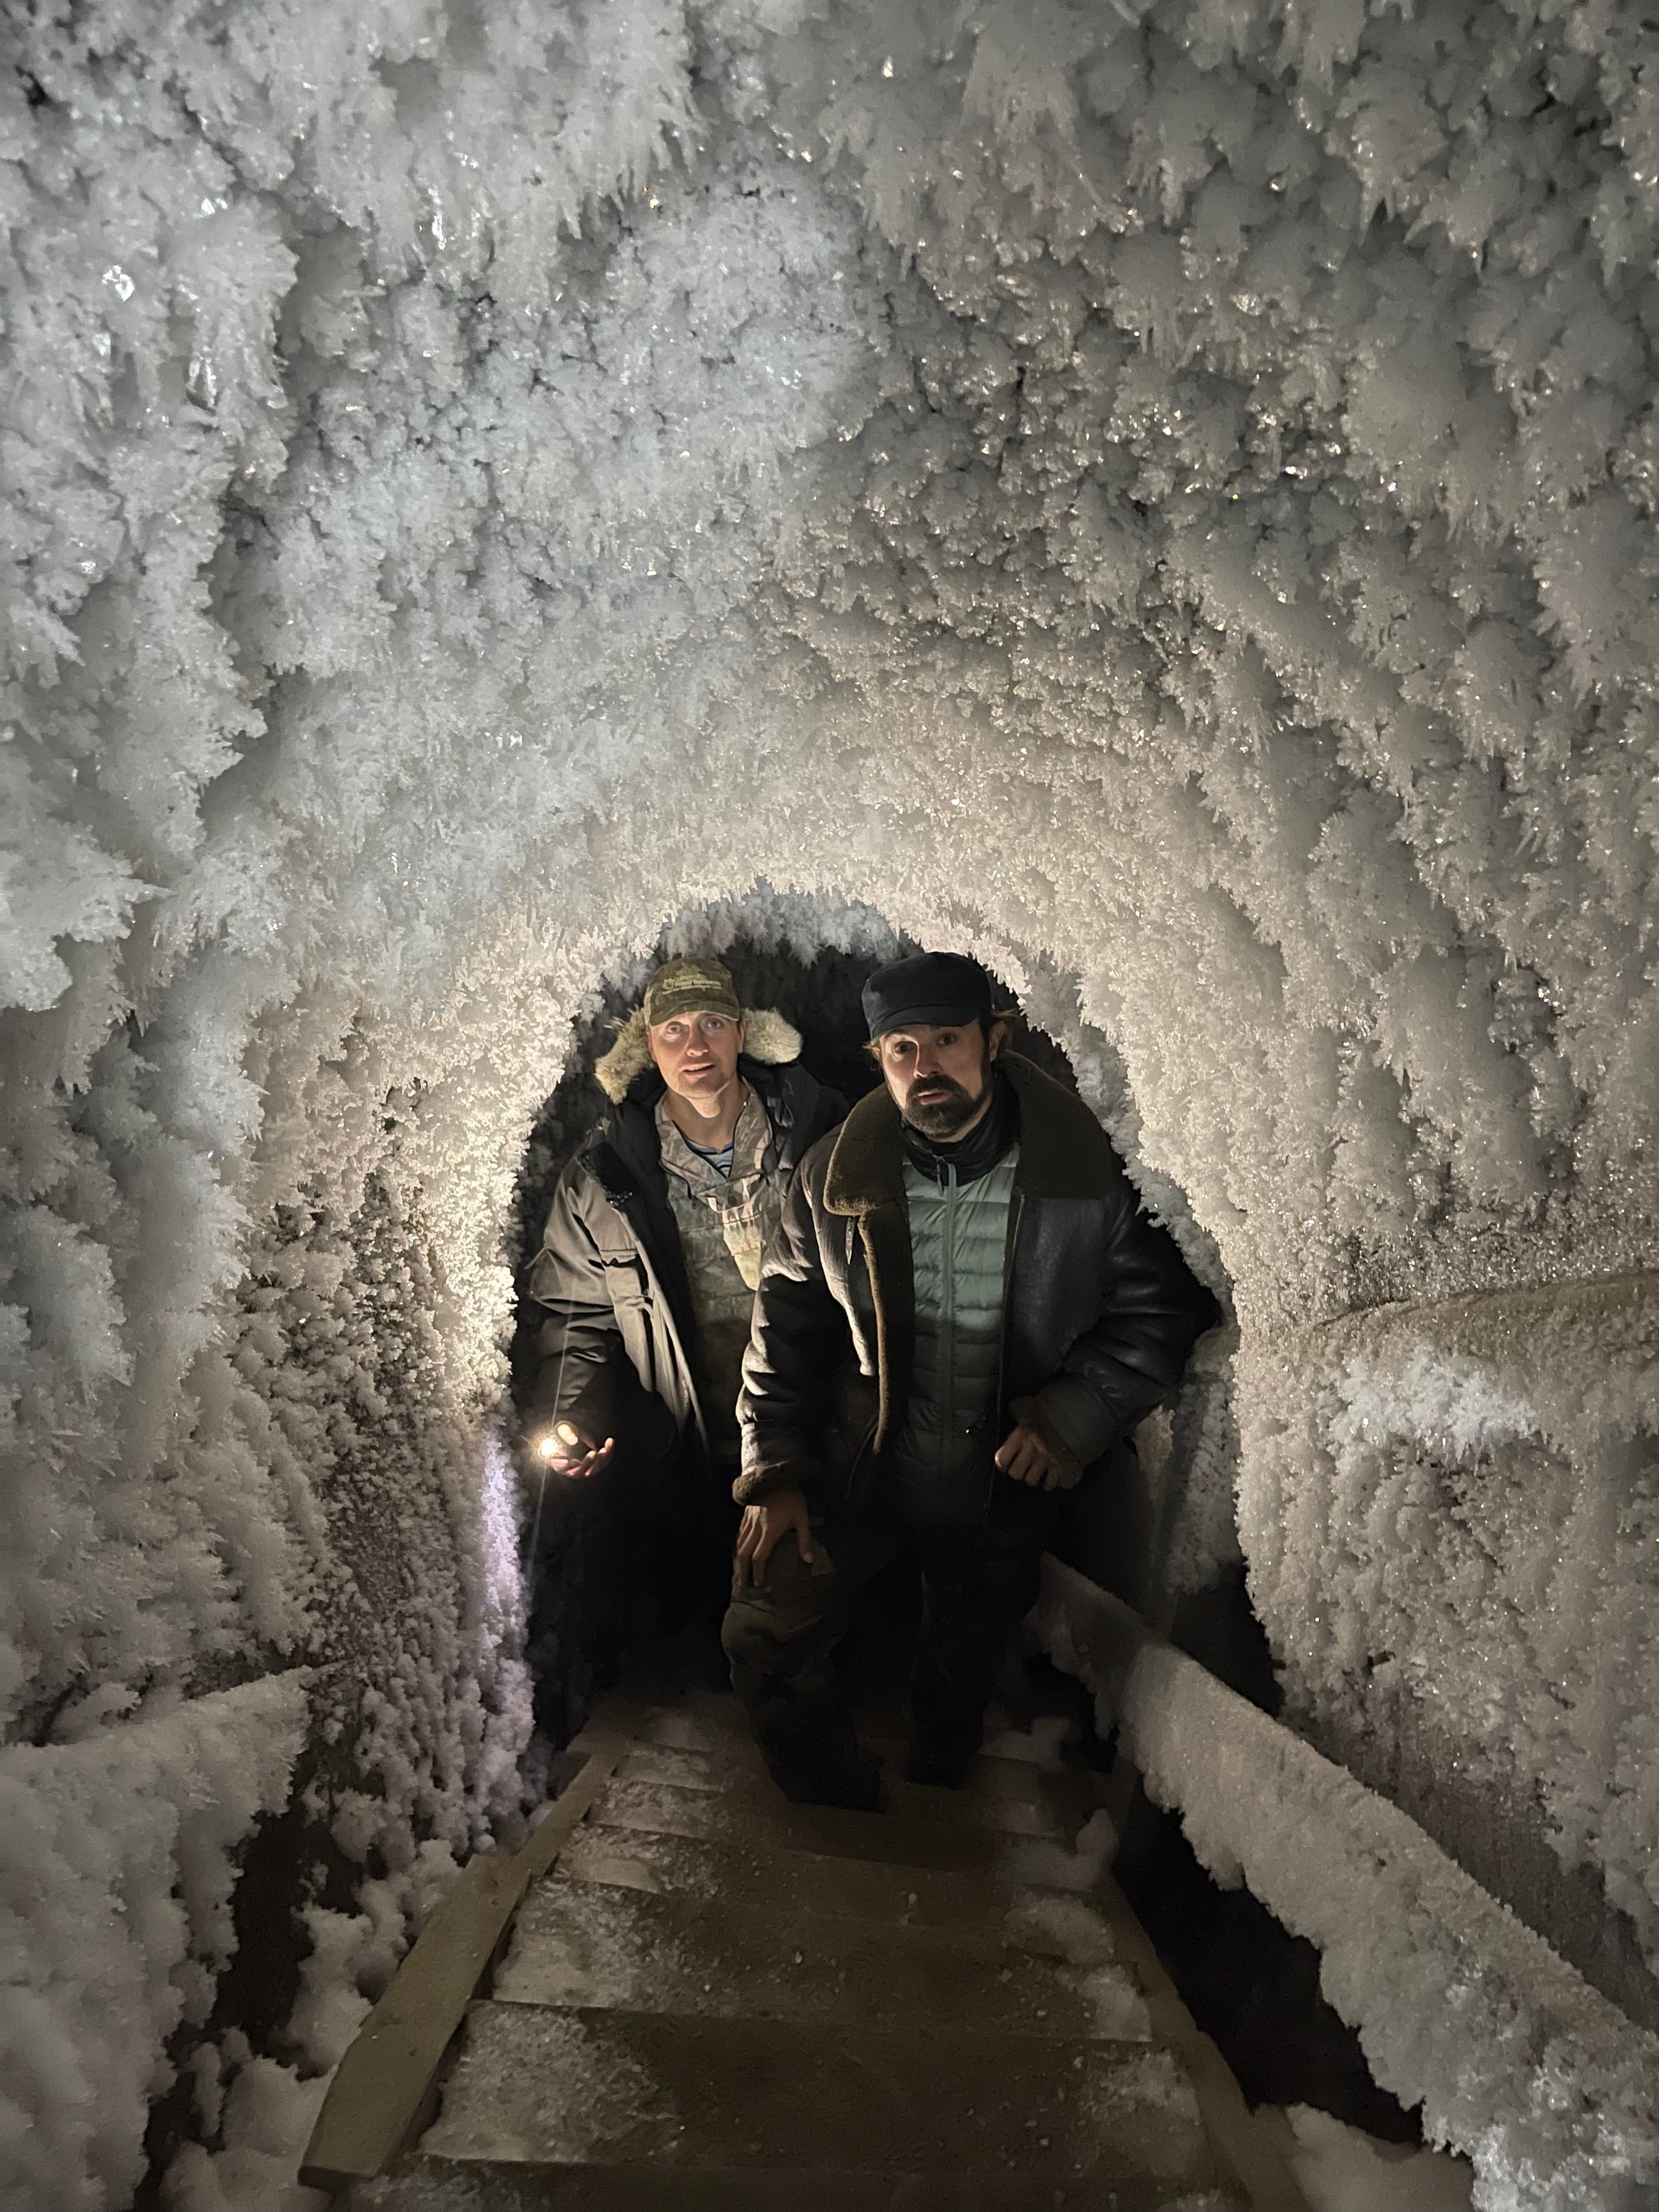 Nikita Zimov takes Evgeny Lebedev into an ice cave, tunnelling deep into the permafrost